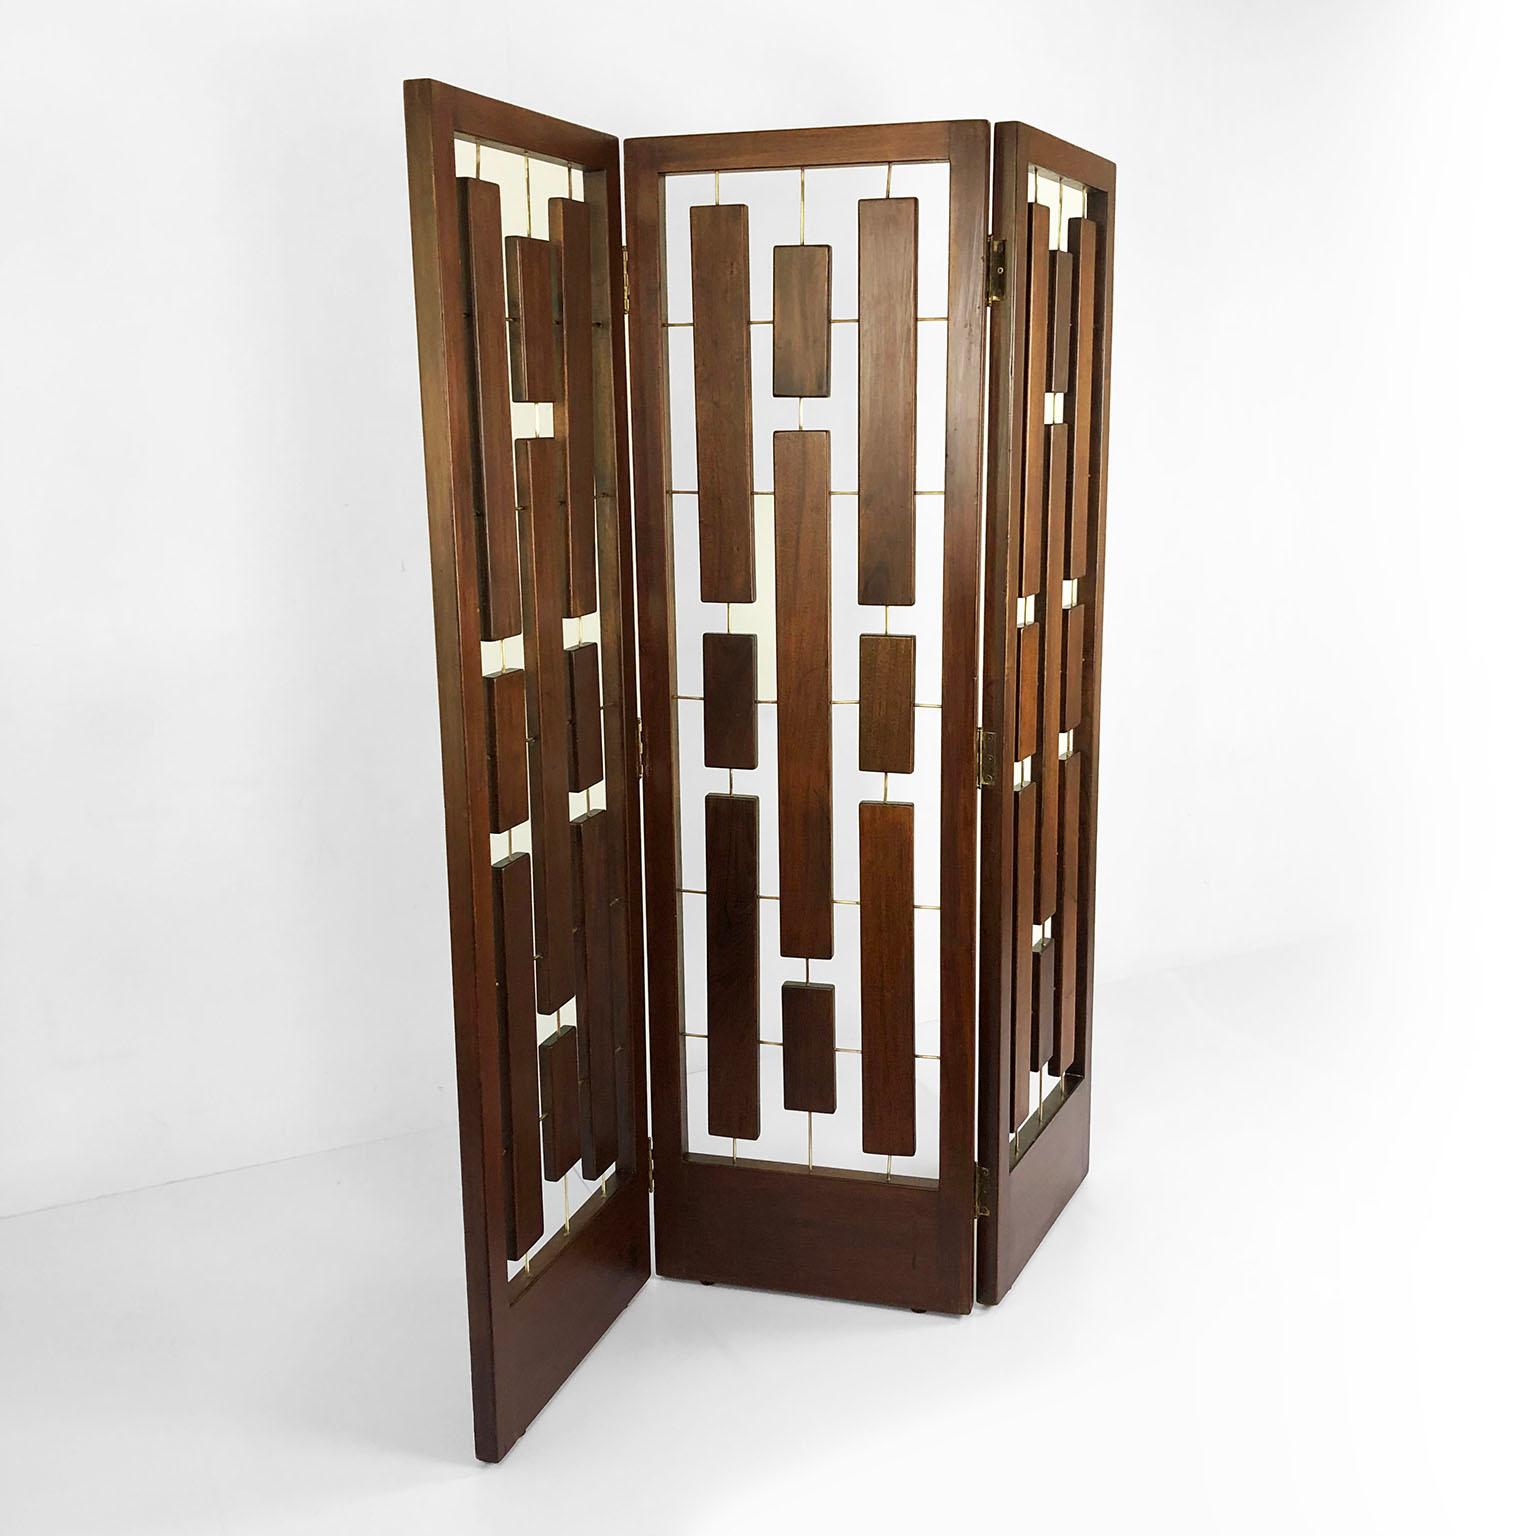 We offer this folding screen made in solid frames of mahogany wood with brass details, circa 1950.